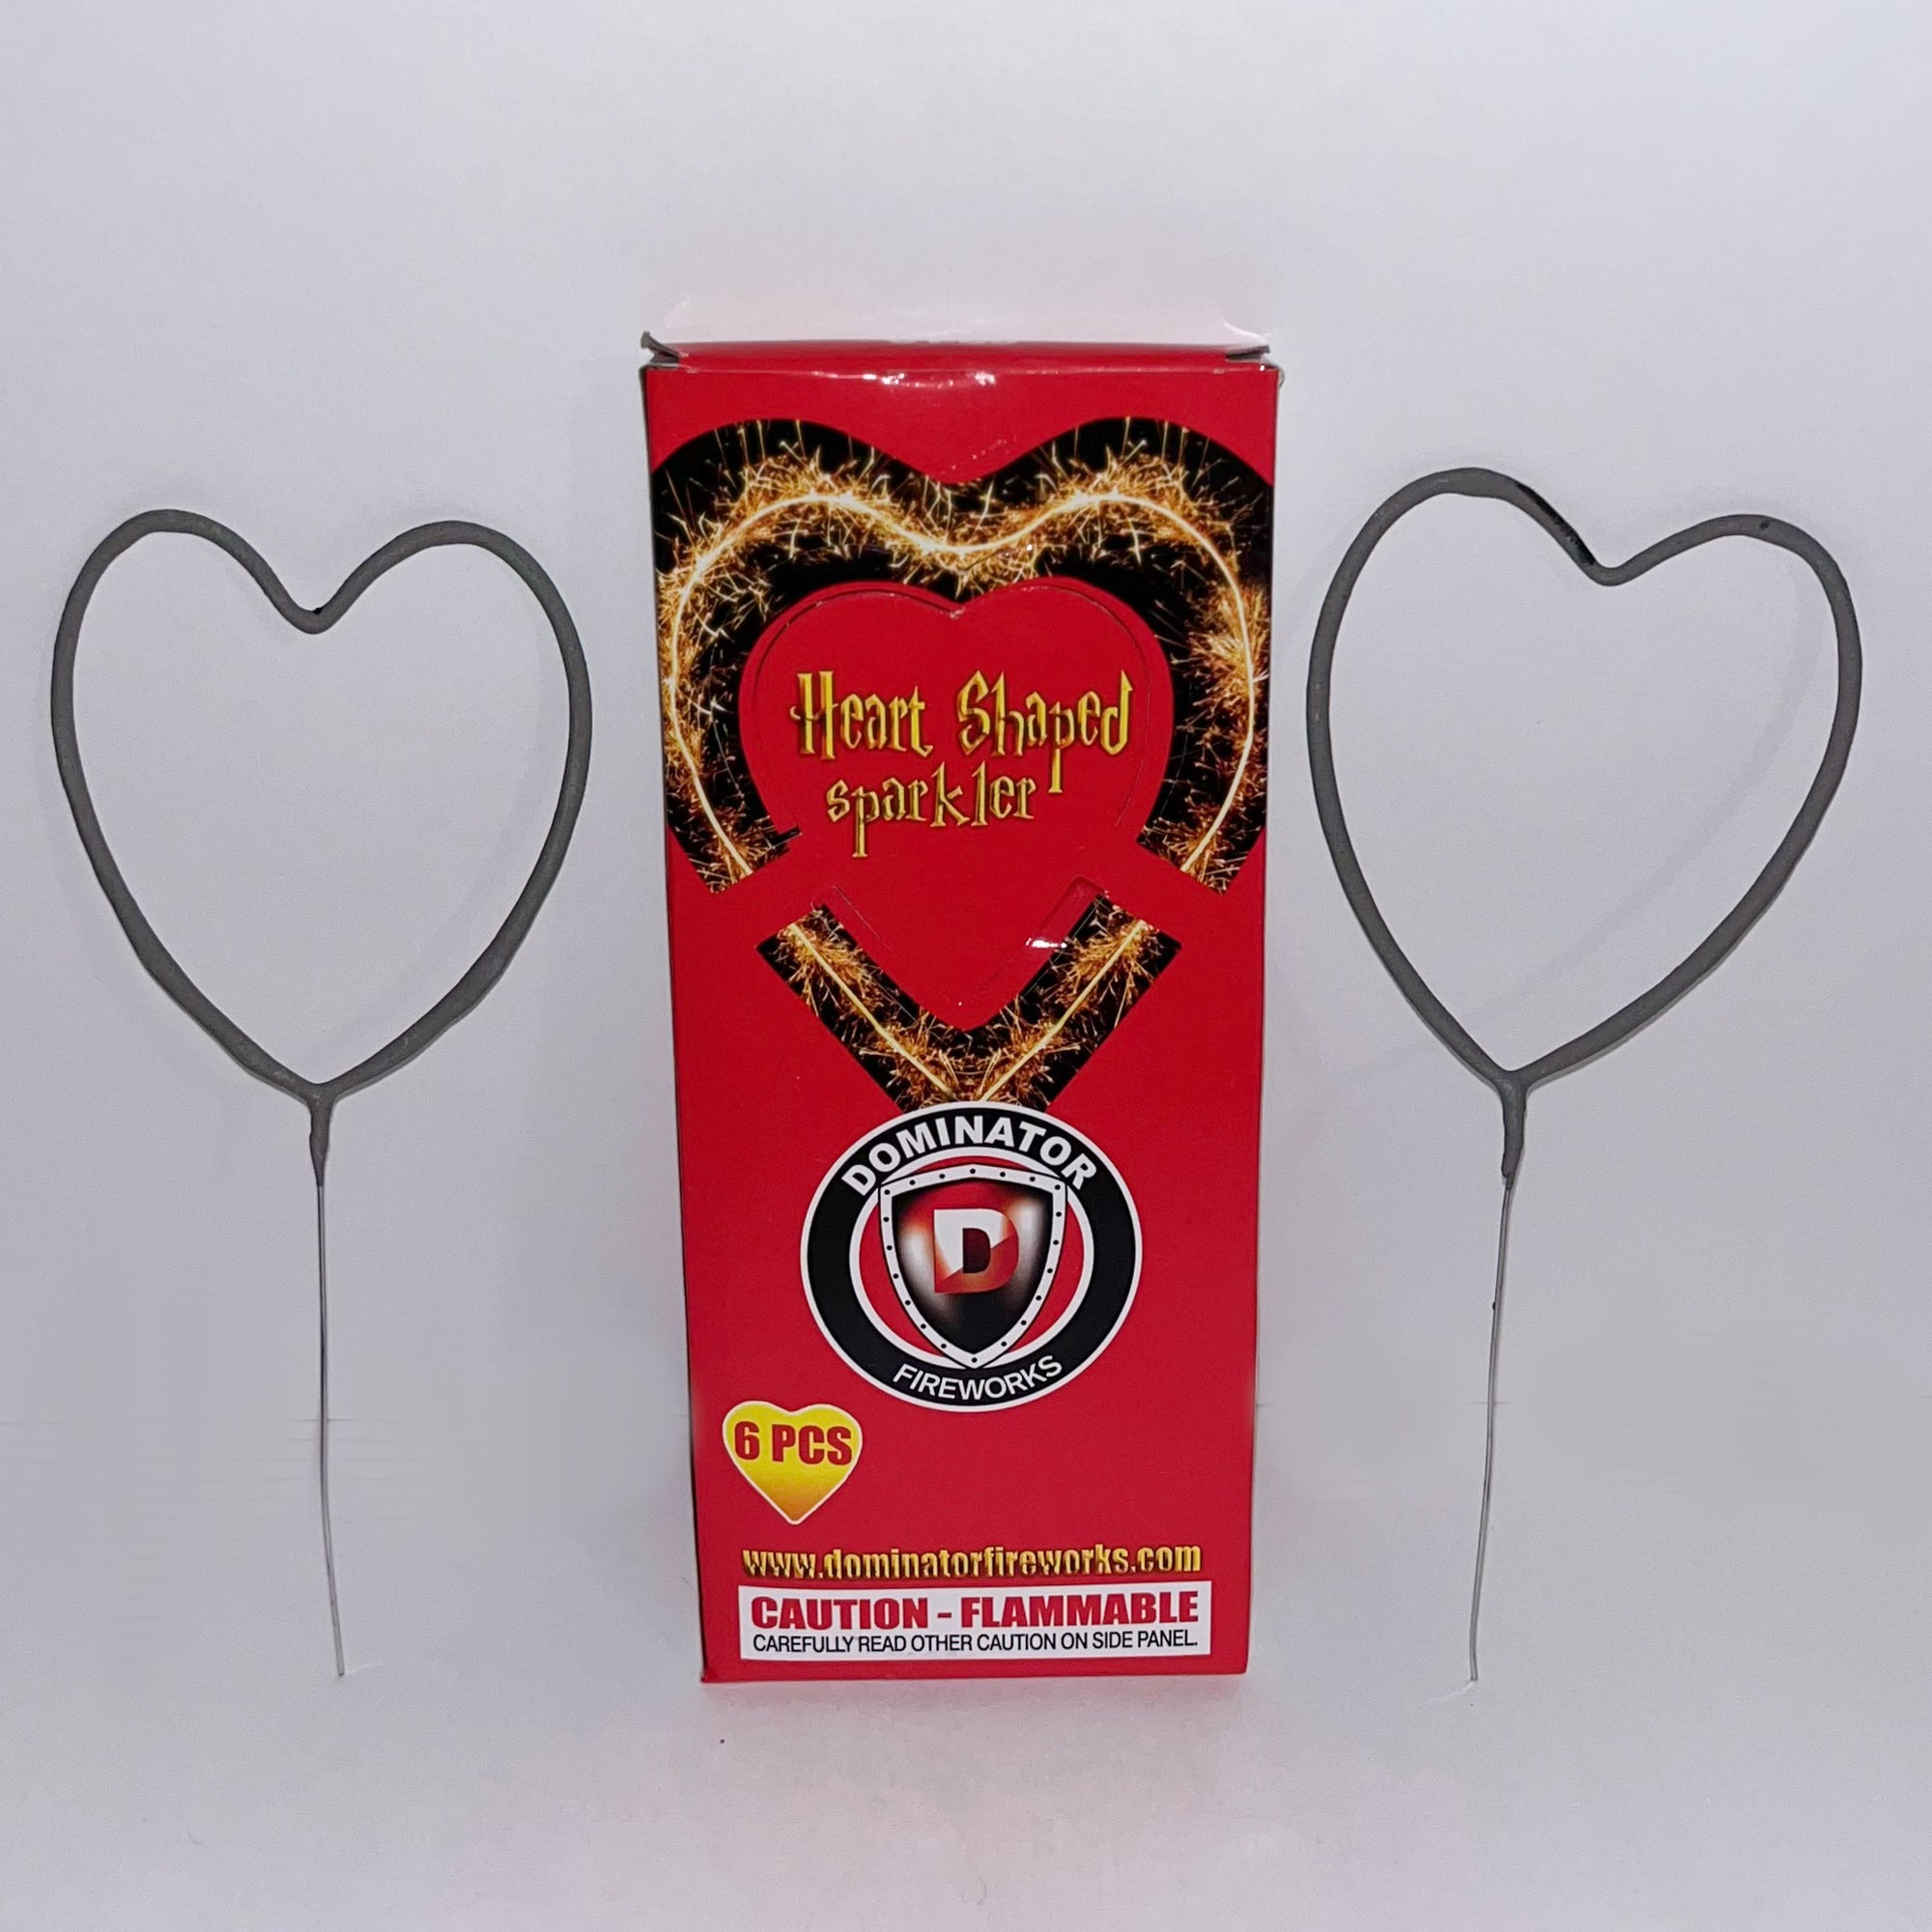 Two Heart sparklers and sparkler box against white background 